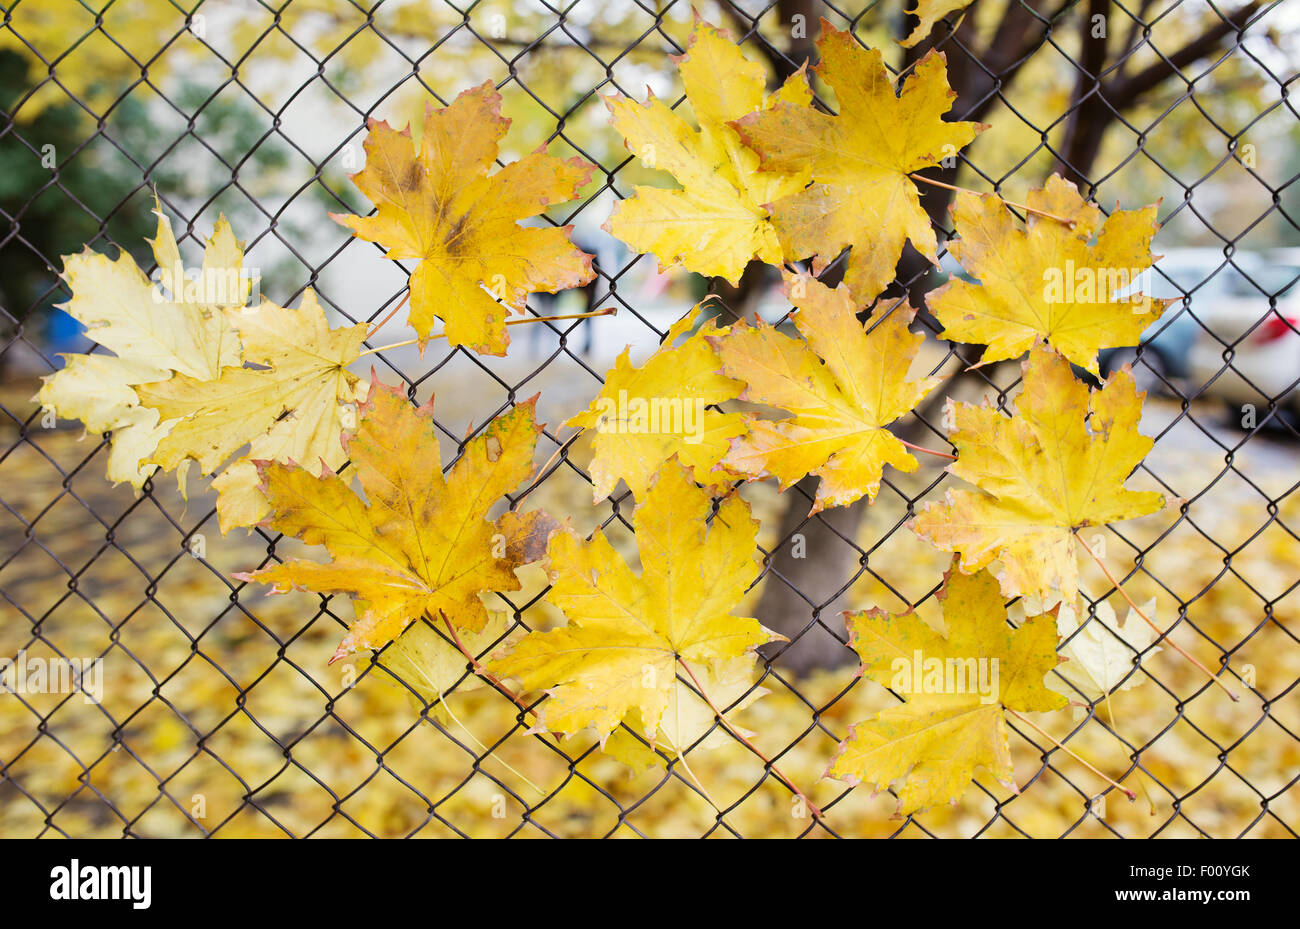 A fallen autumn leaves caught on a wire fence Stock Photo